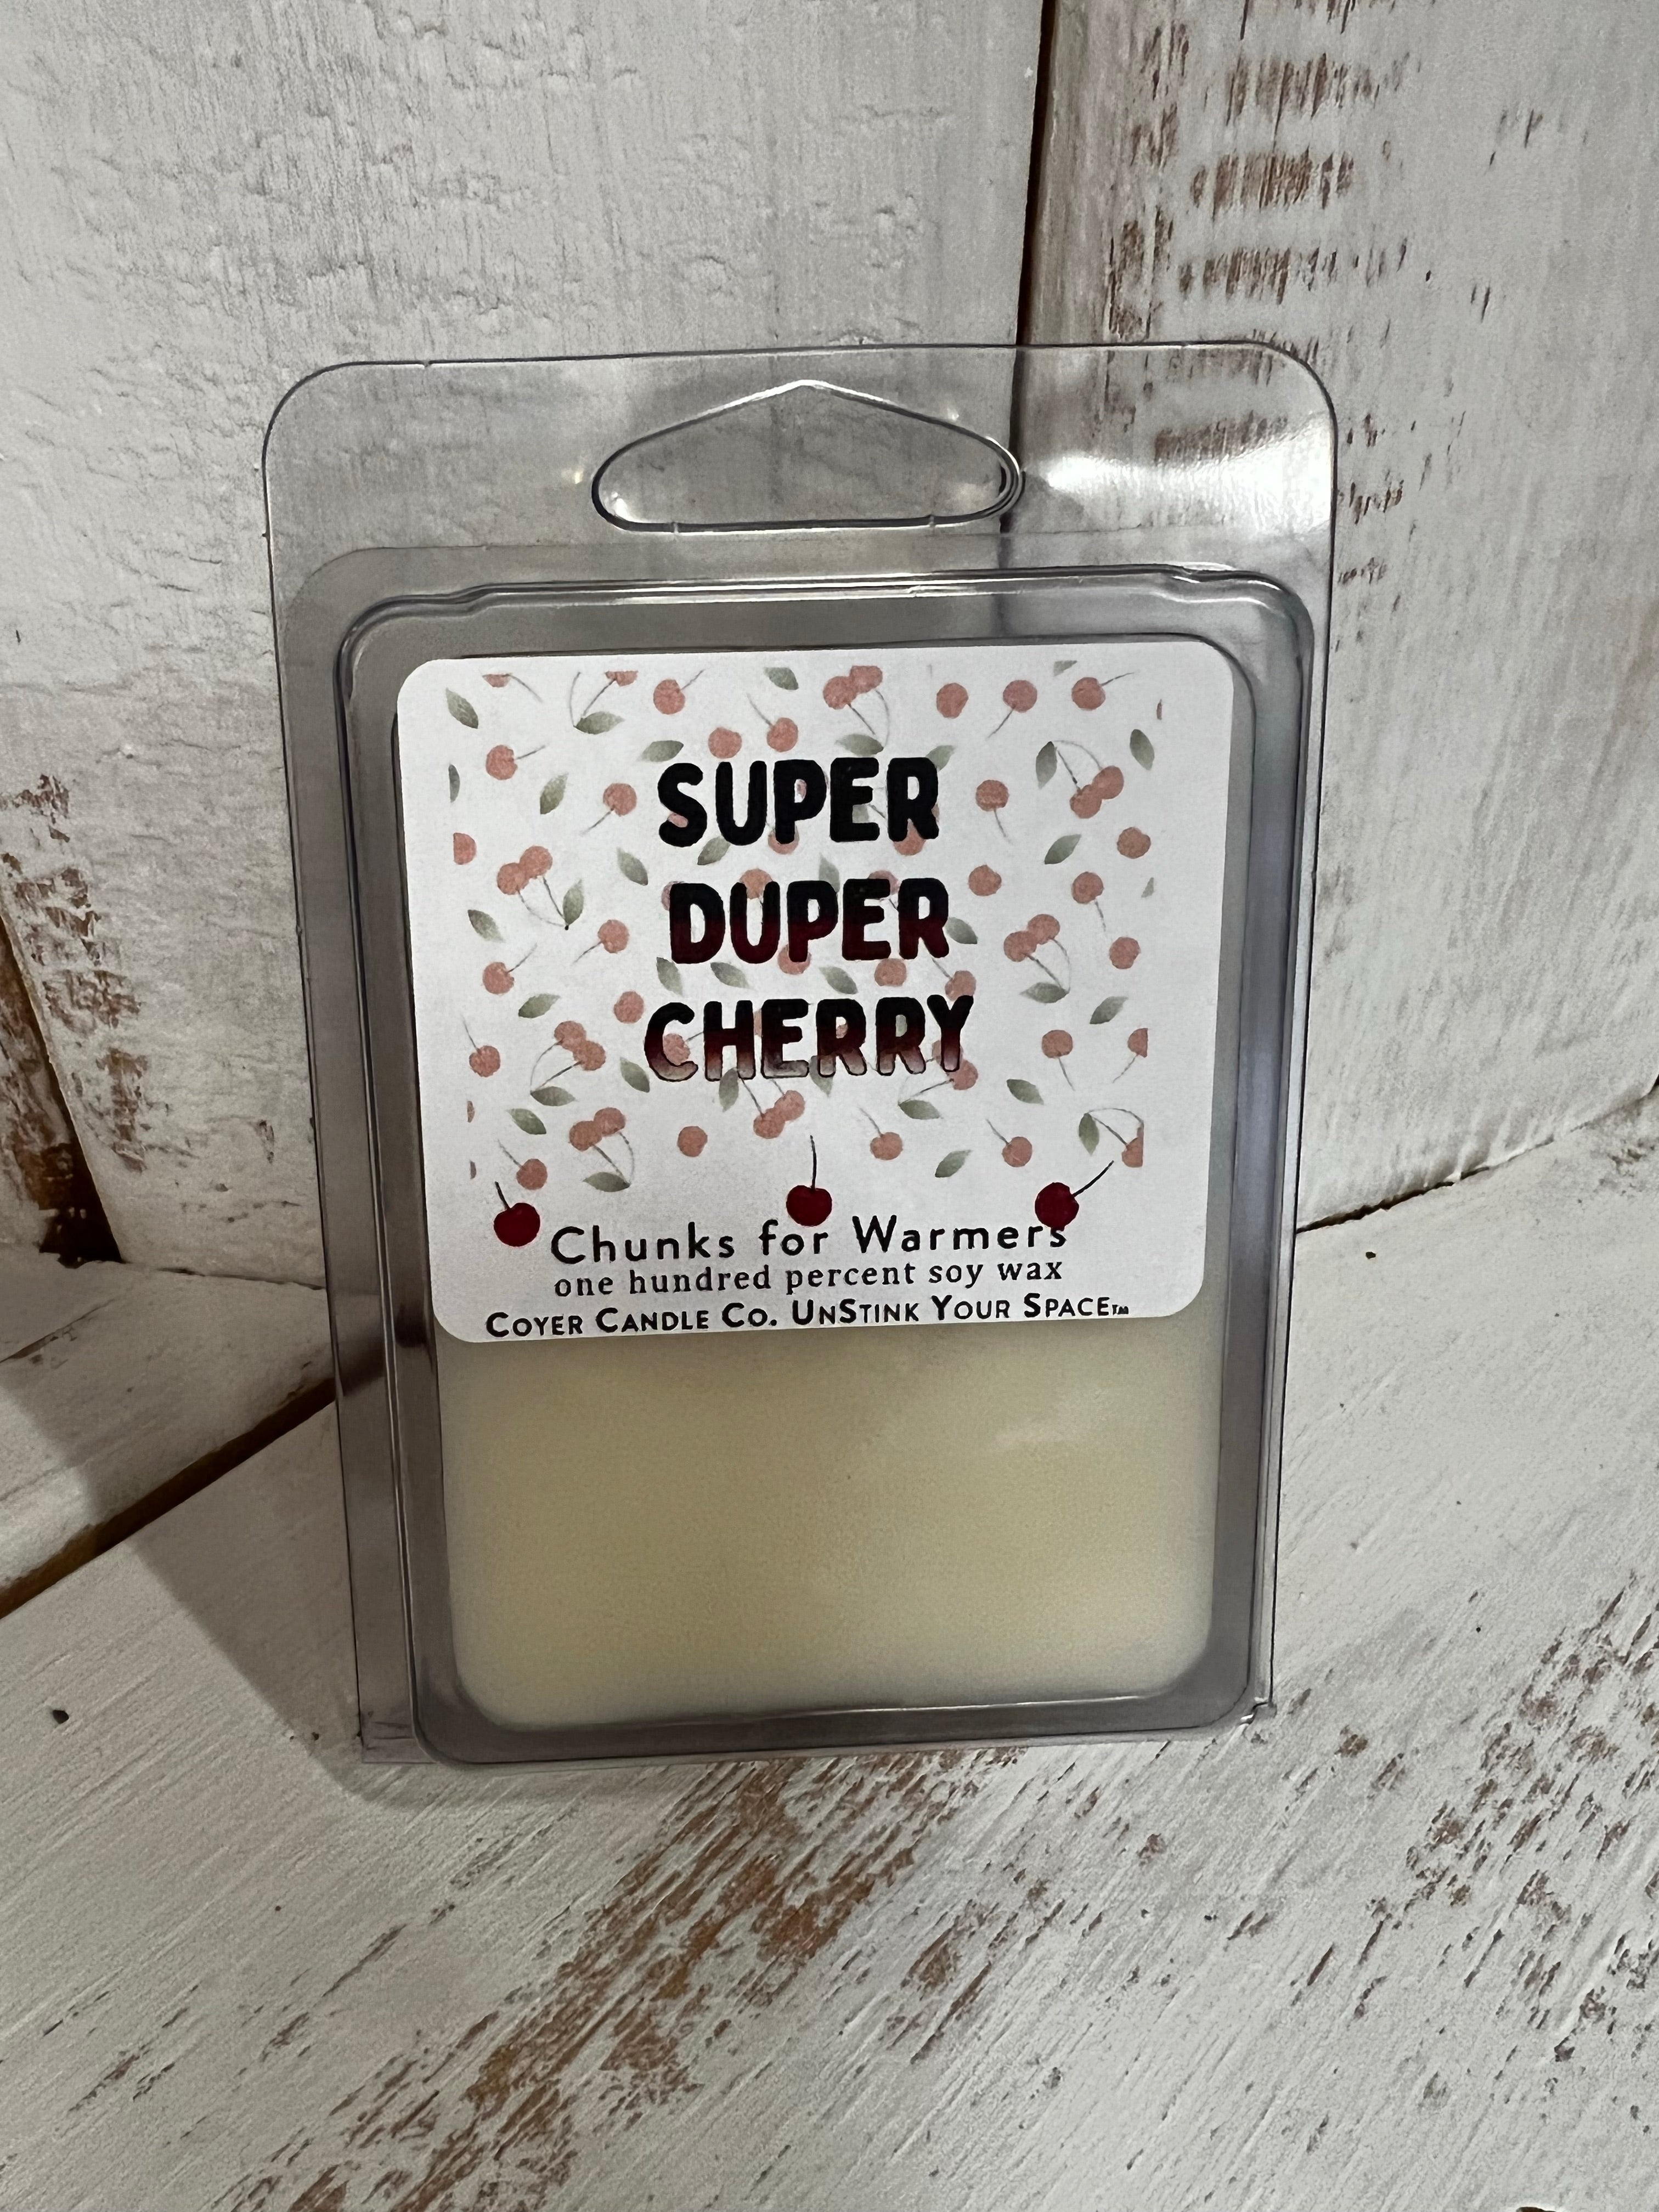 Soy Wax Melts for Warmers